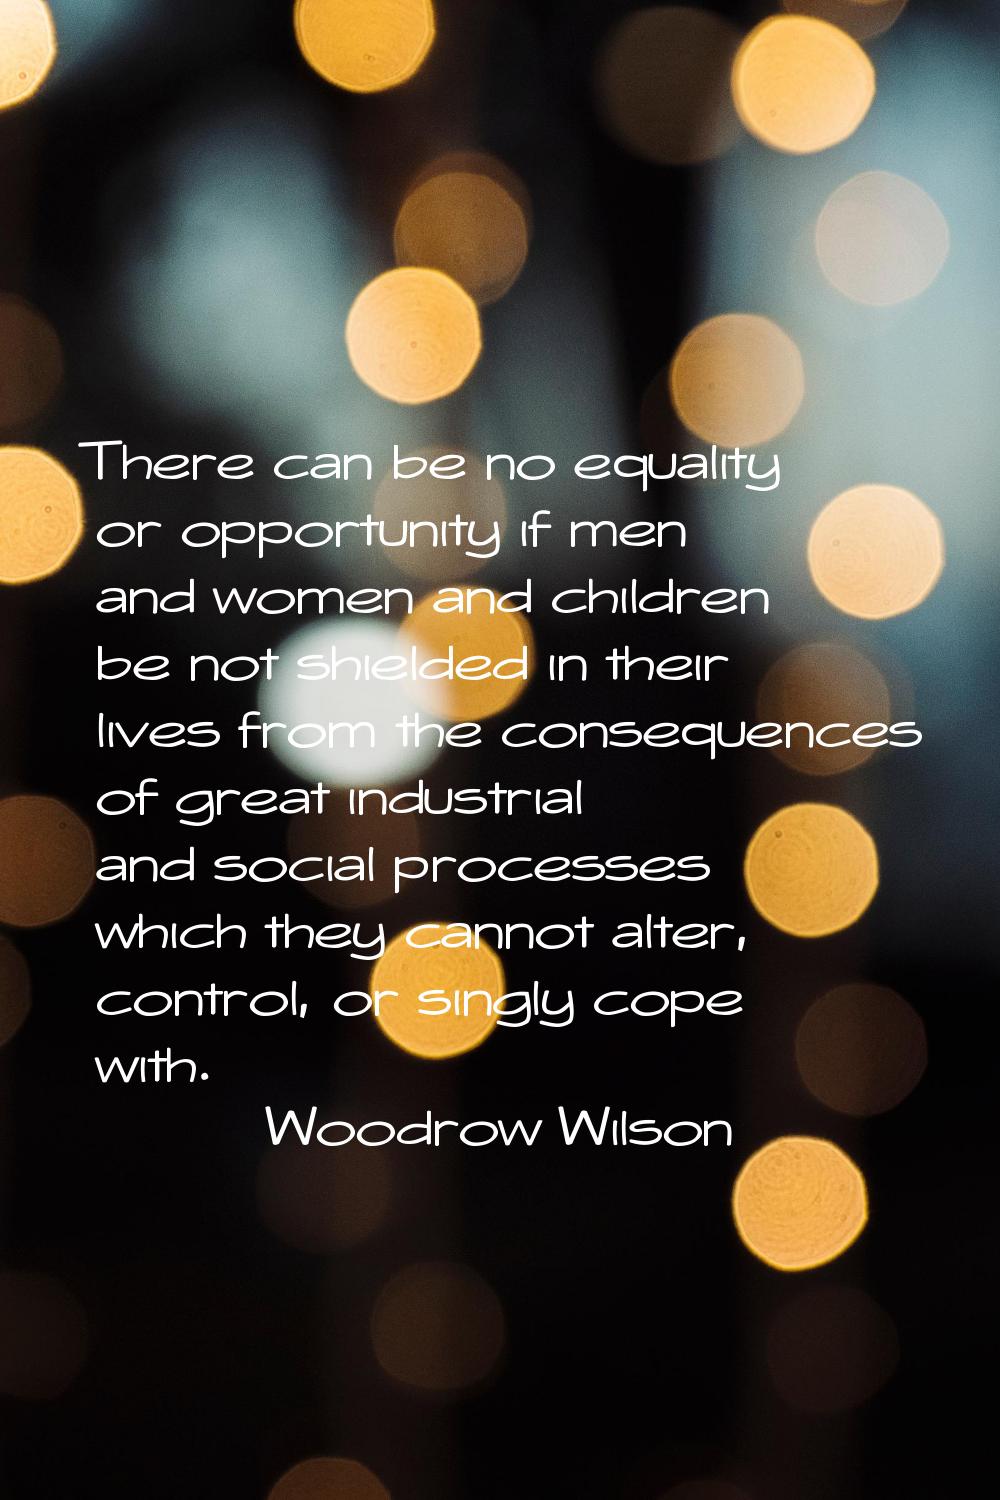 There can be no equality or opportunity if men and women and children be not shielded in their live